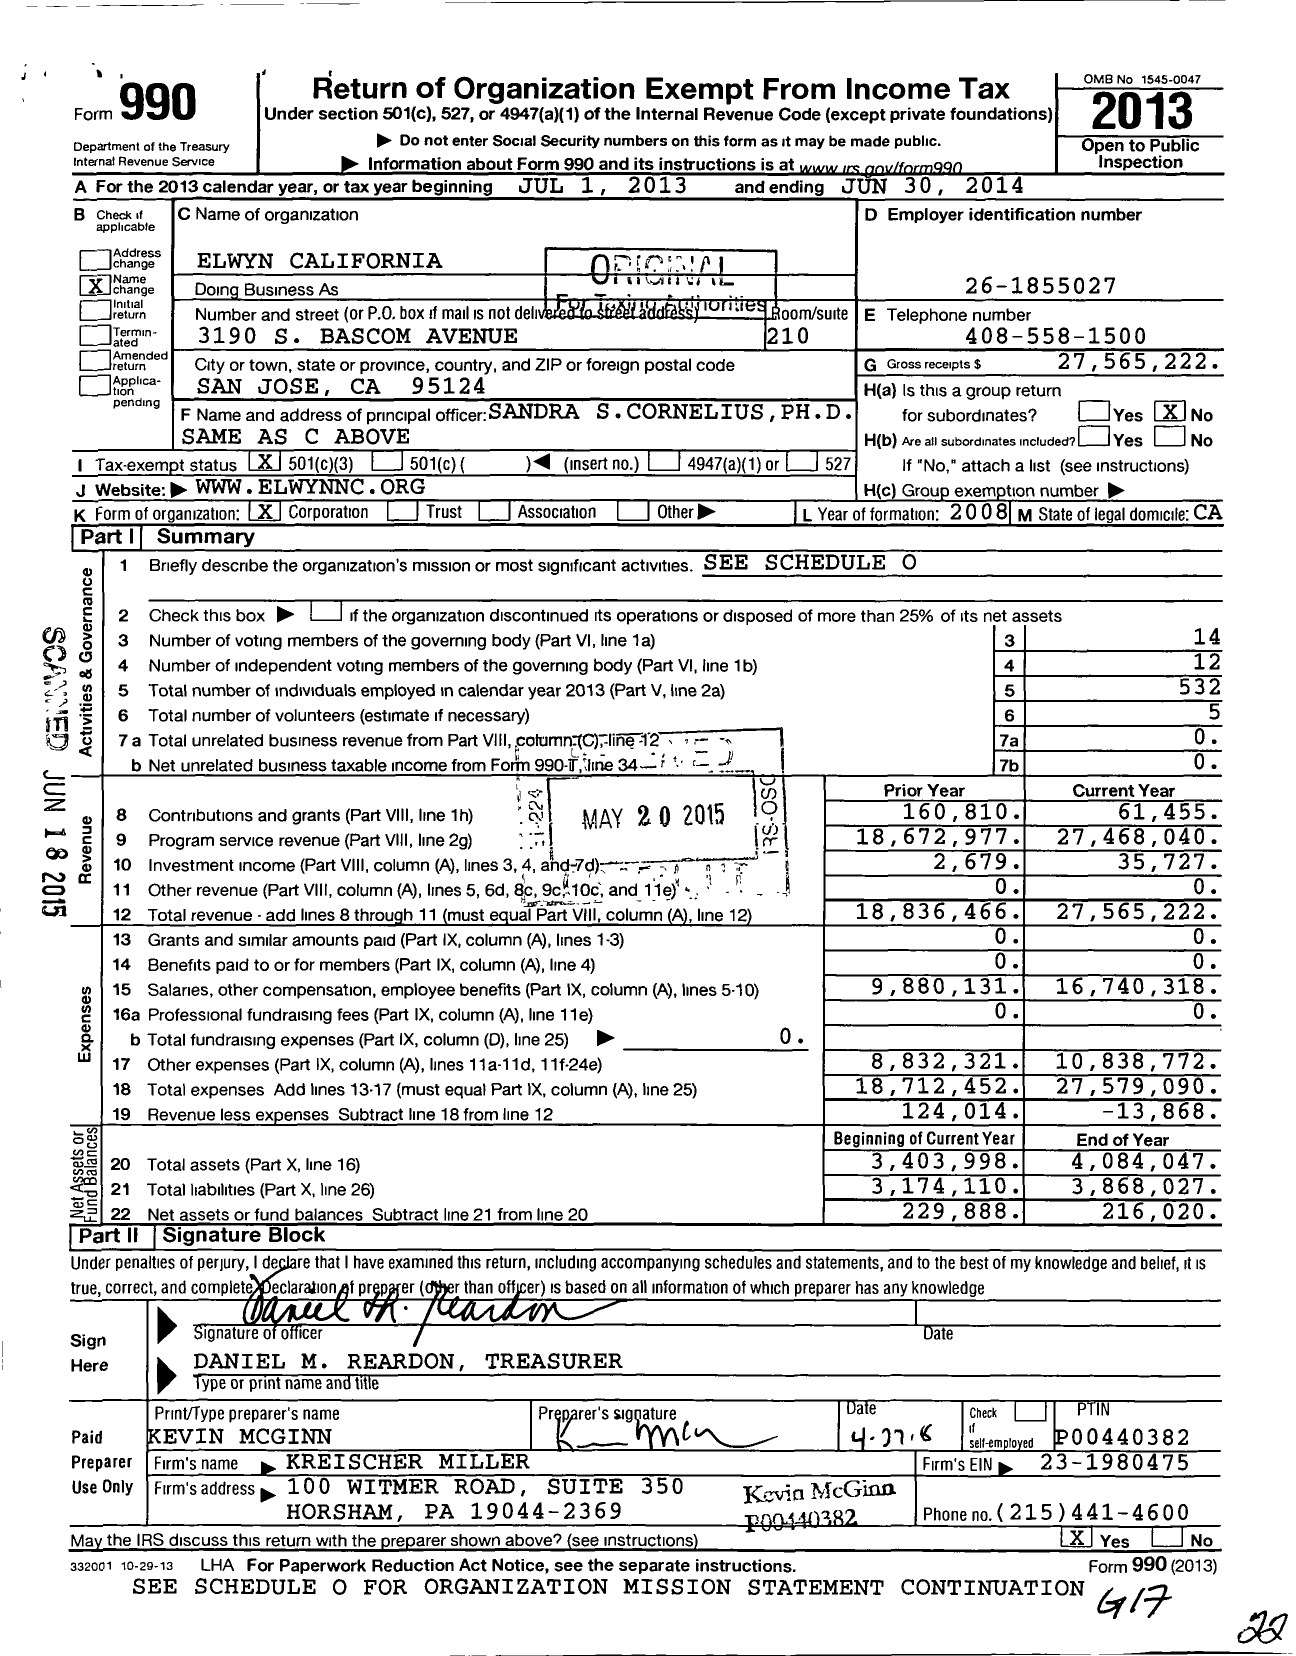 Image of first page of 2013 Form 990 for Elwyn California